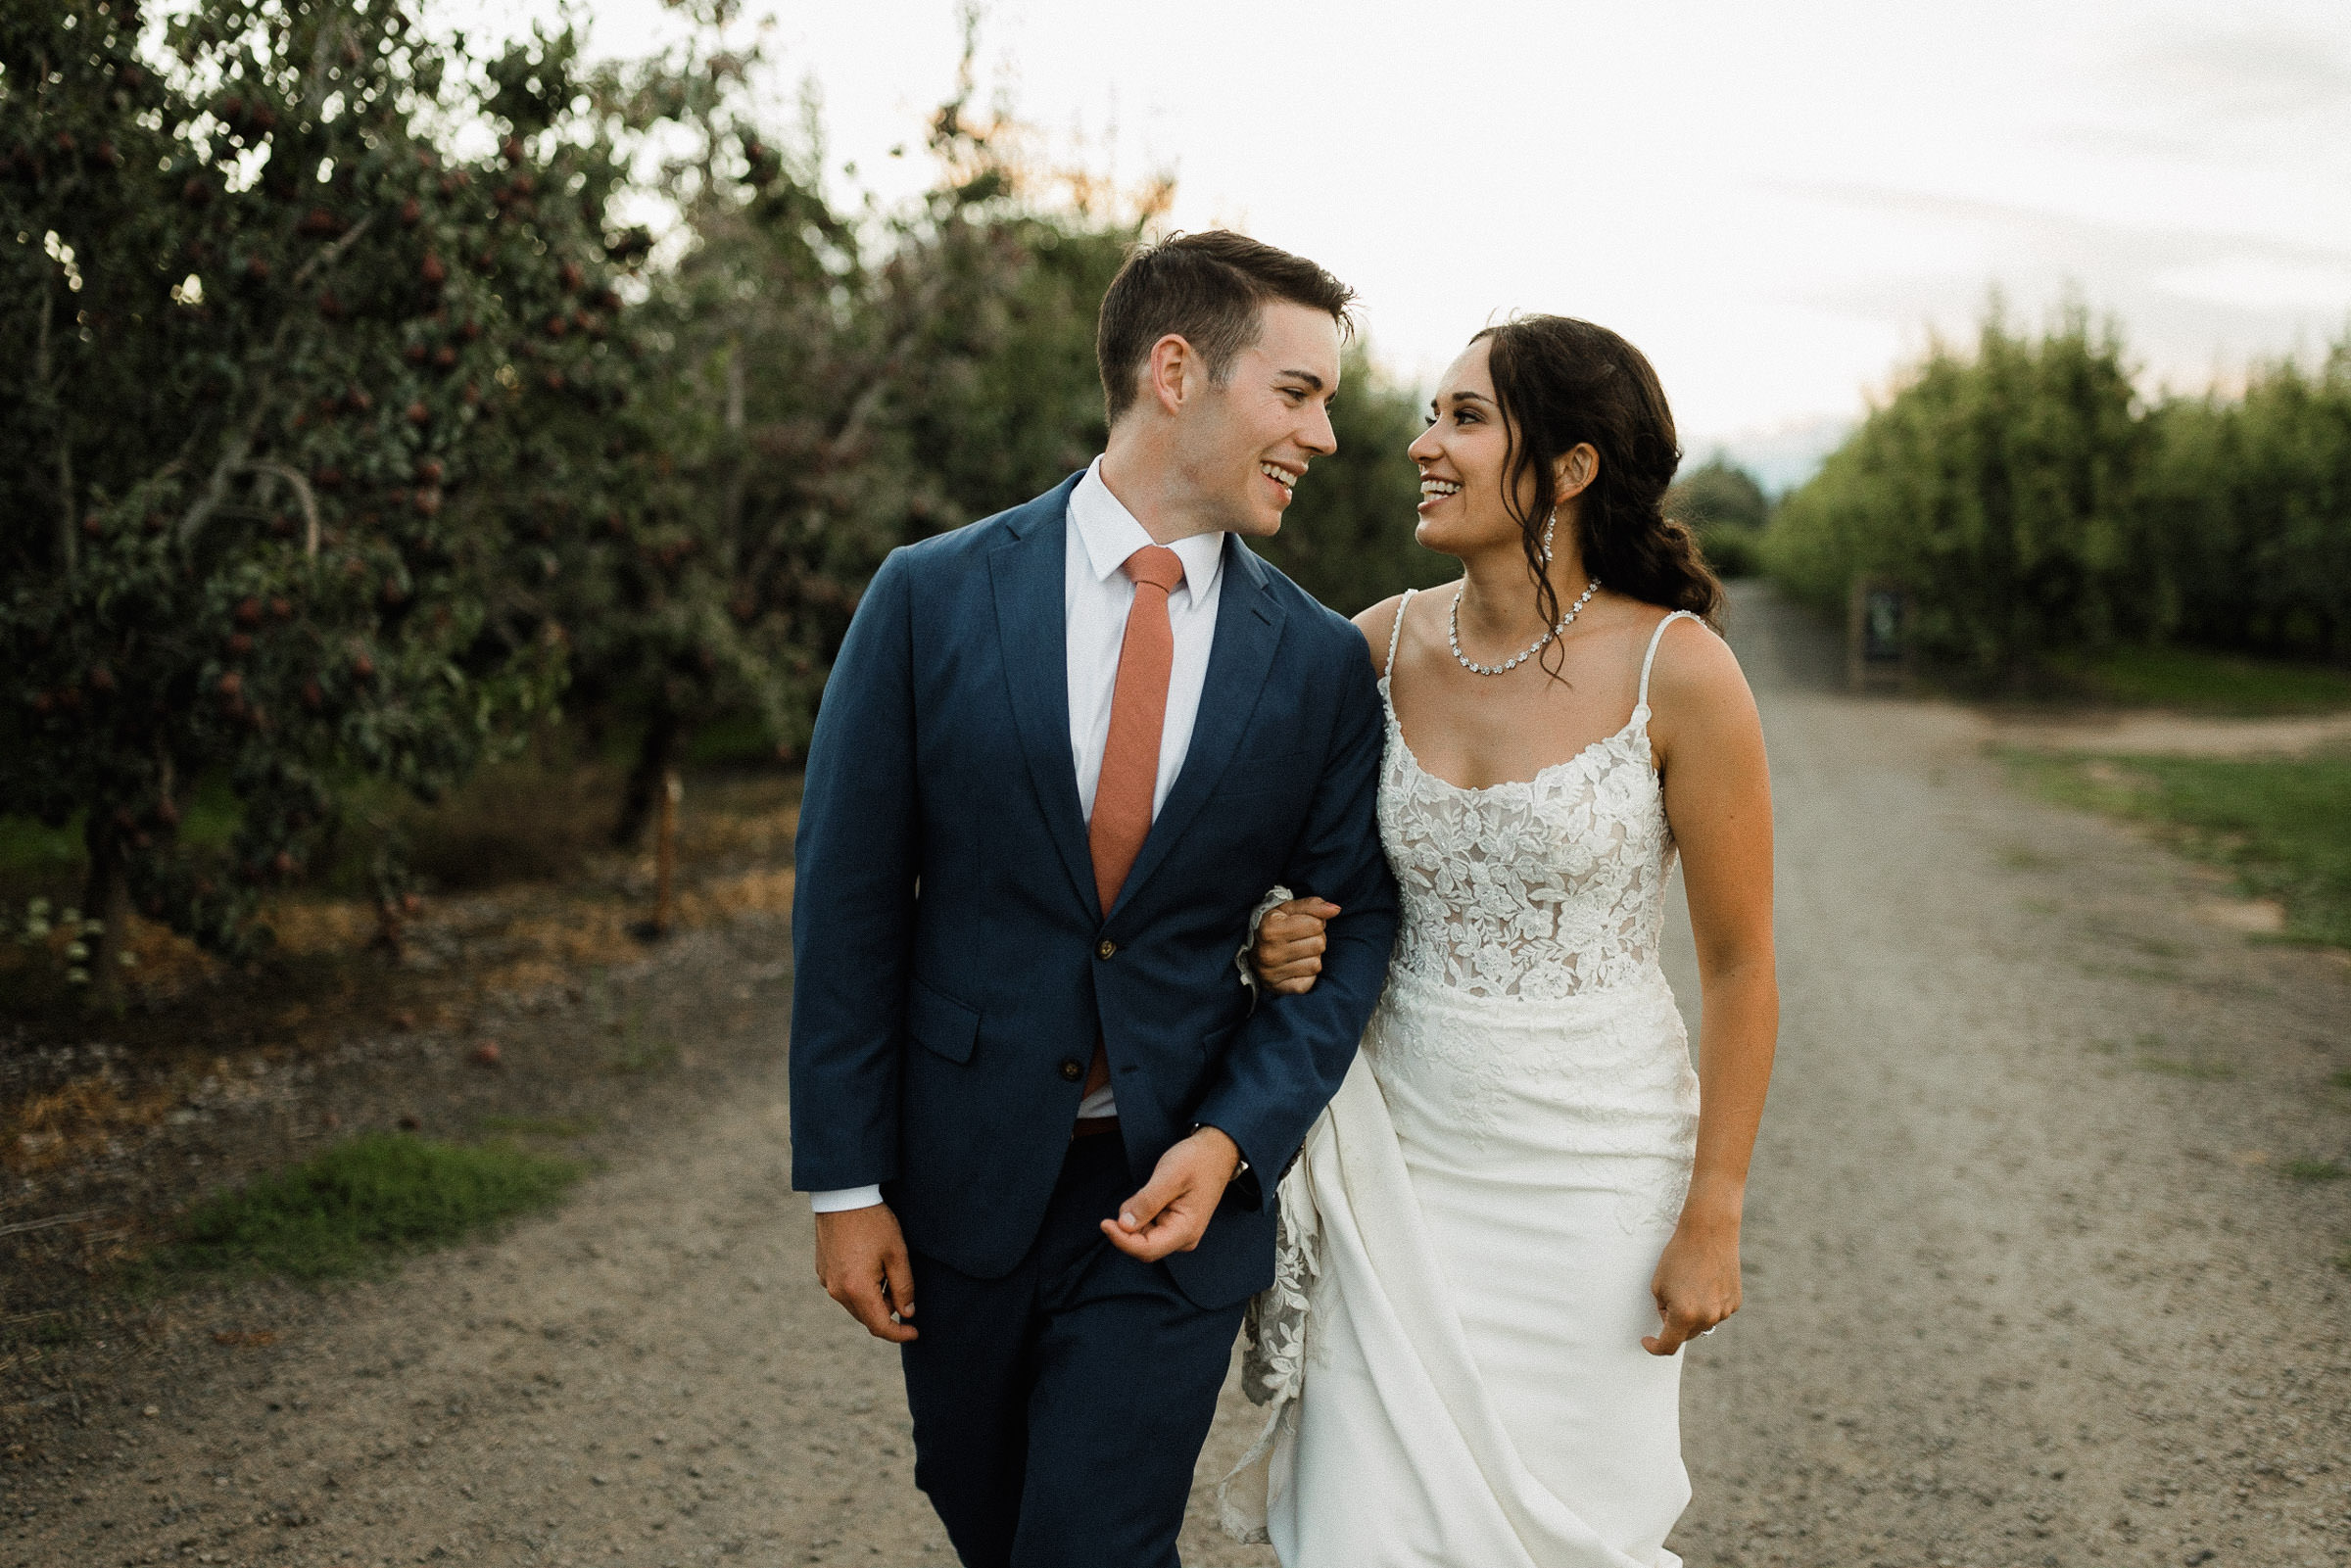 Bride and groom laugh while walking down a gravel road in an orchard